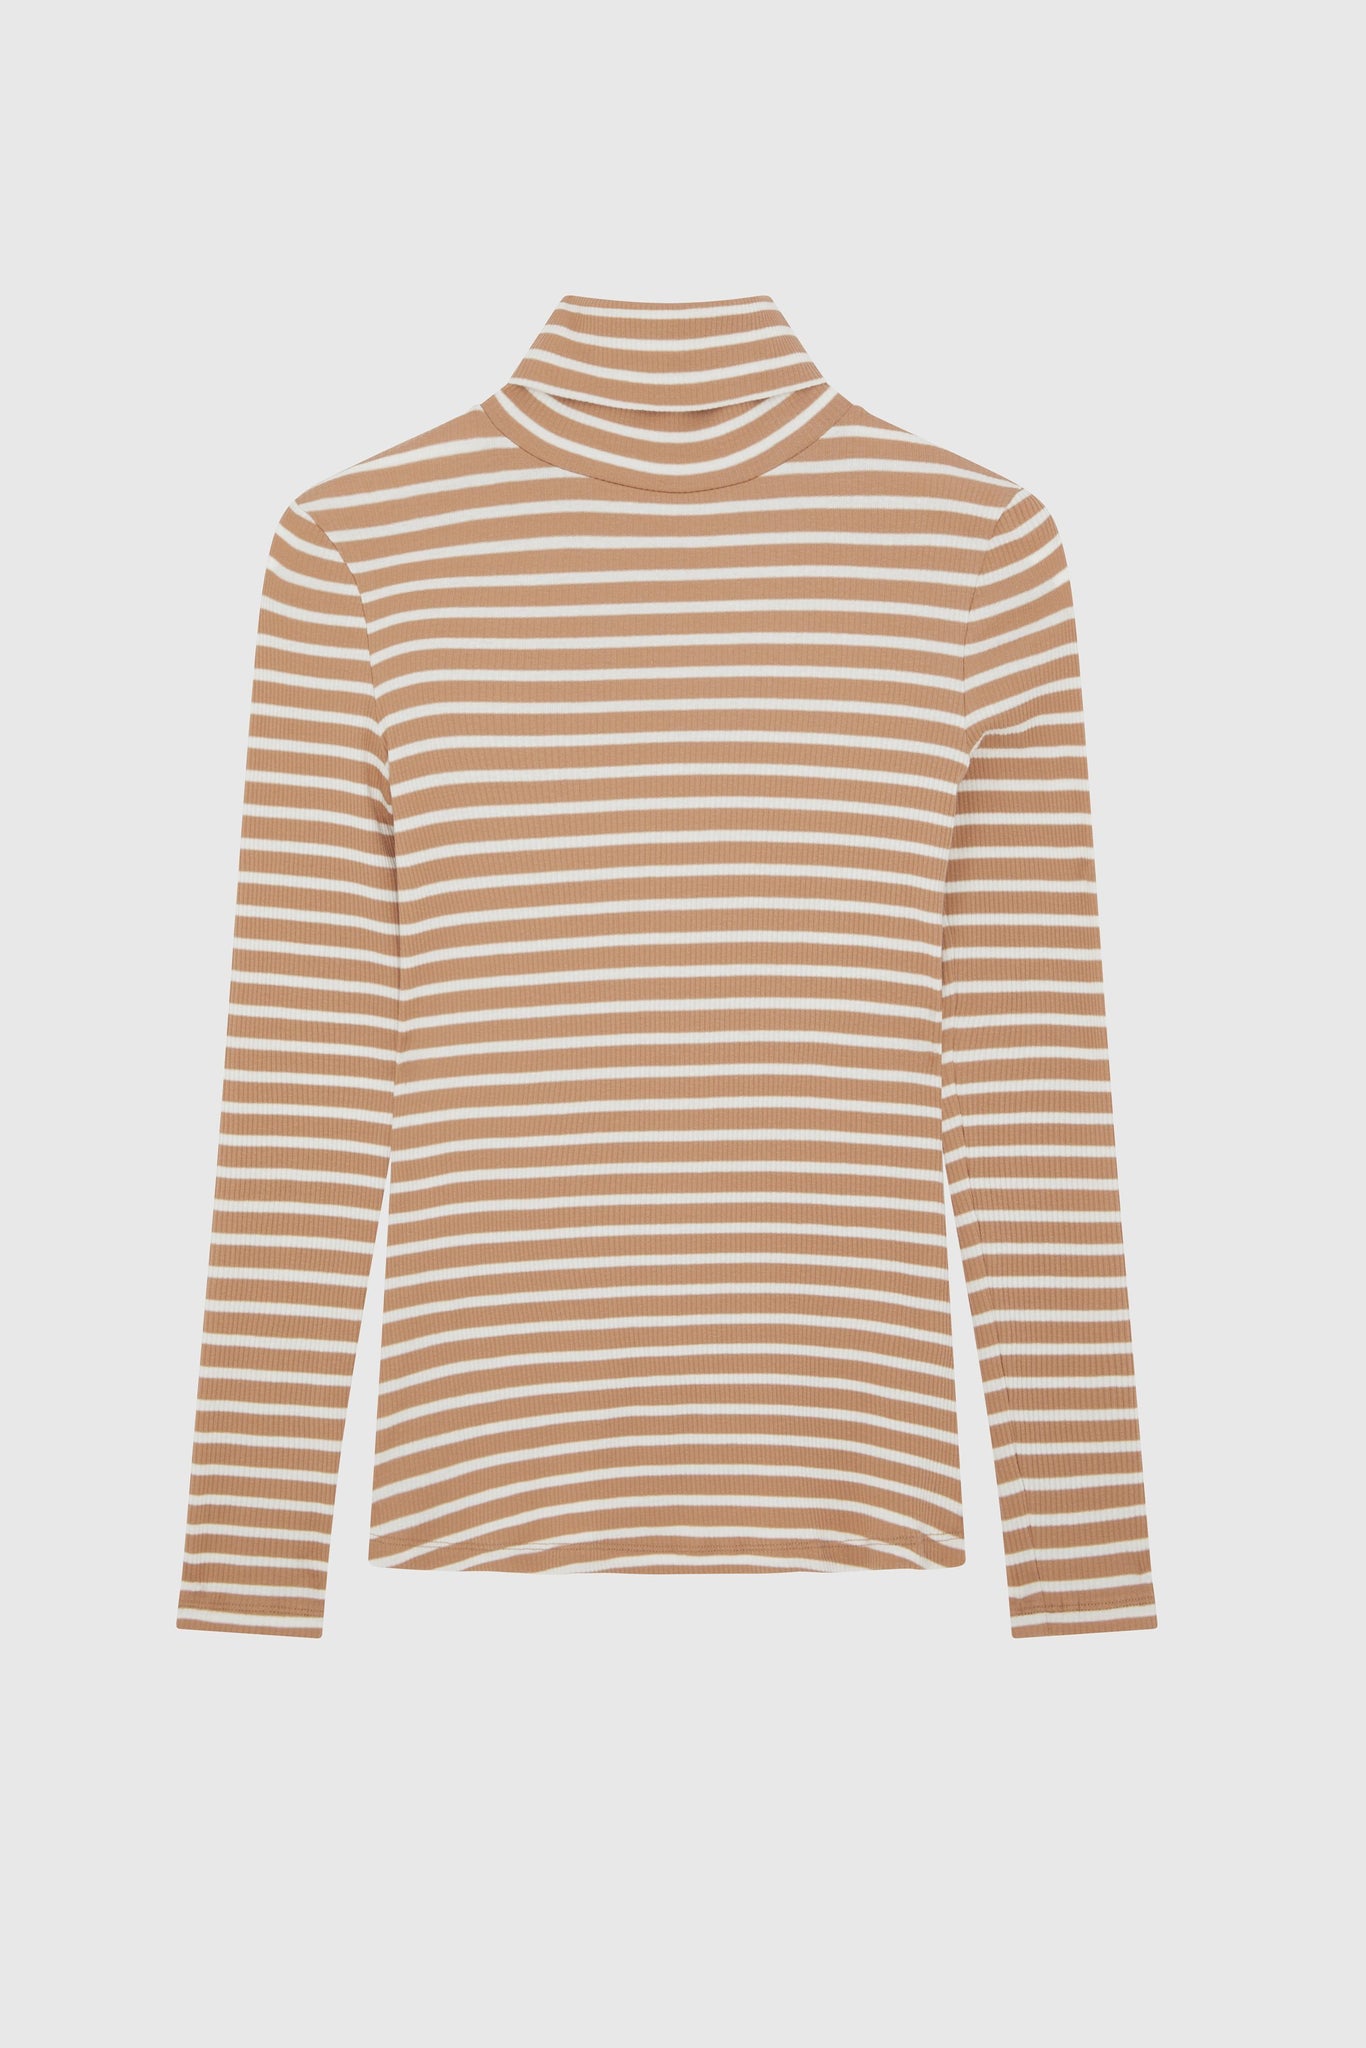 Women's Striped Cotton Roll Neck Top - Birch and Ecru Stripe Cotton Top - Quality Long Sleeve Roll Neck Top by Lavender Hill Clothing